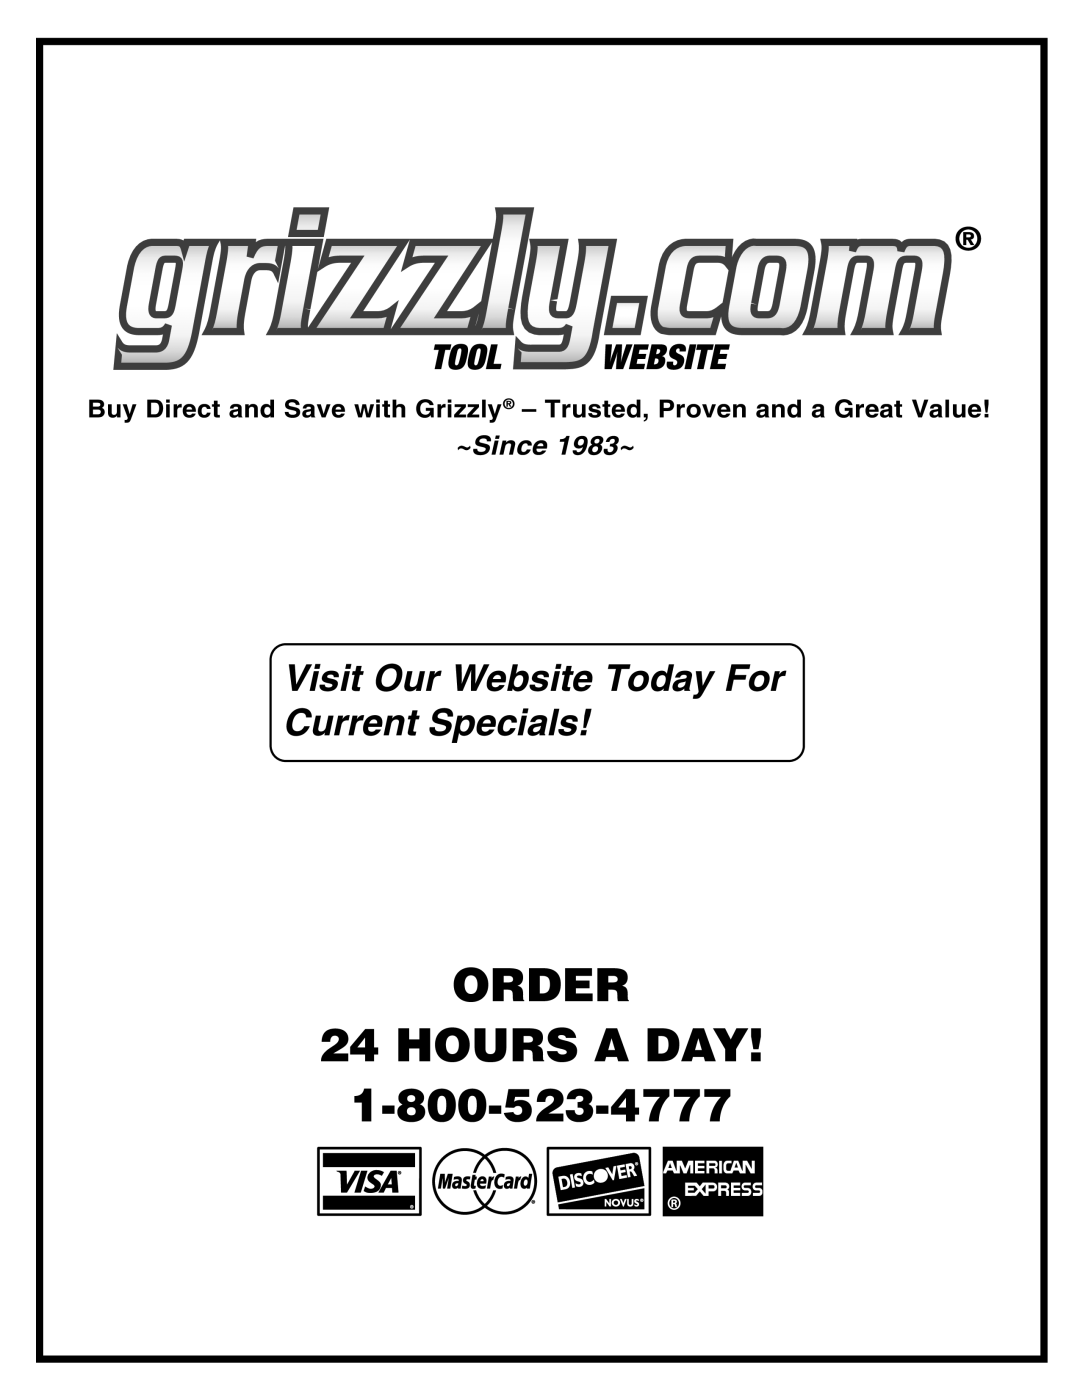 Grizzly T10458 Buy Direct and Save with Grizzly - Trusted, Proven and a Great Value, ORDER 24 HOURS A DAY, ~Since 1983~ 